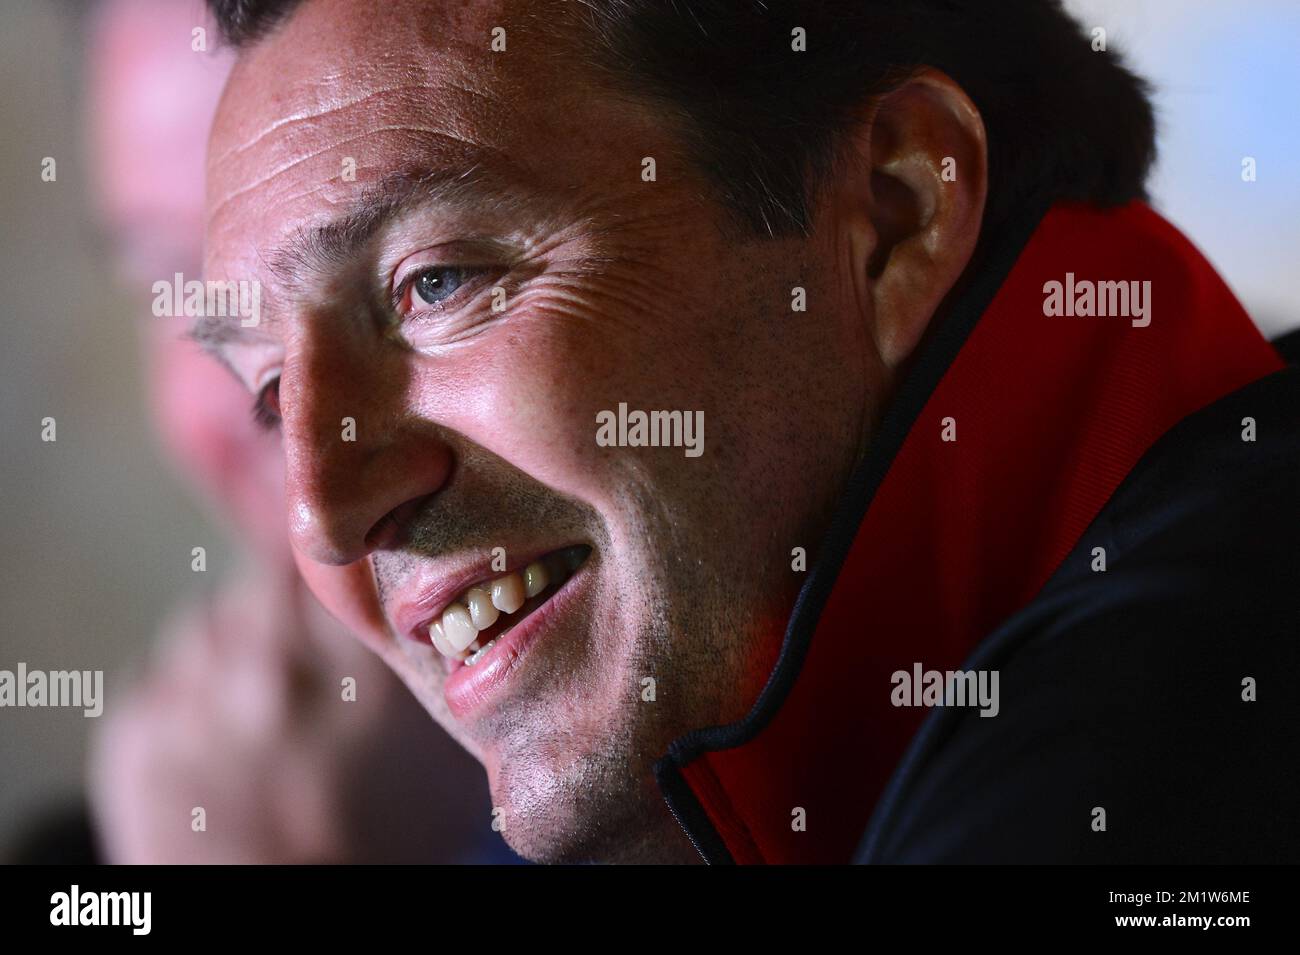 Belgium's head coach Marc Wilmots pictured at a press conference of Belgian national soccer team Red Devils in Mogi das Cruzes, Brazil, during the 2014 FIFA World Cup, Thursday 03 July 2014. Red Devils will play next Saturday the quarter final match against Argentina.  BELGA PHOTO DIRK WAEM Stock Photo